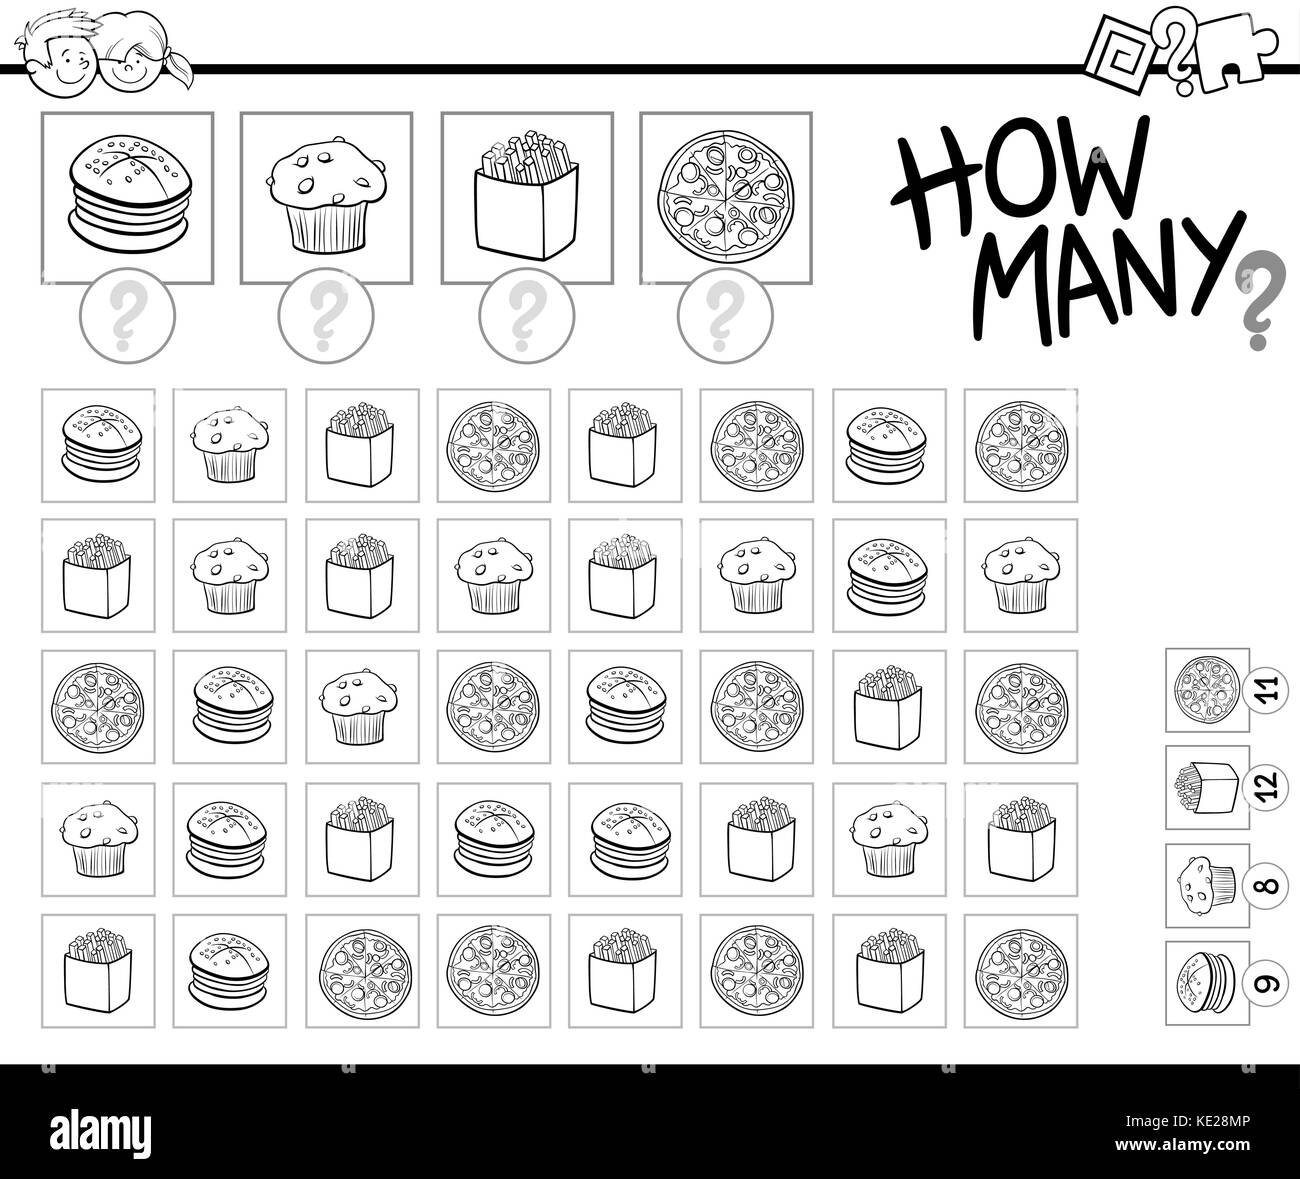 Black and White Cartoon Illustration of Educational How Many Counting Game for Children with Food Objects Coloring Book Stock Vector